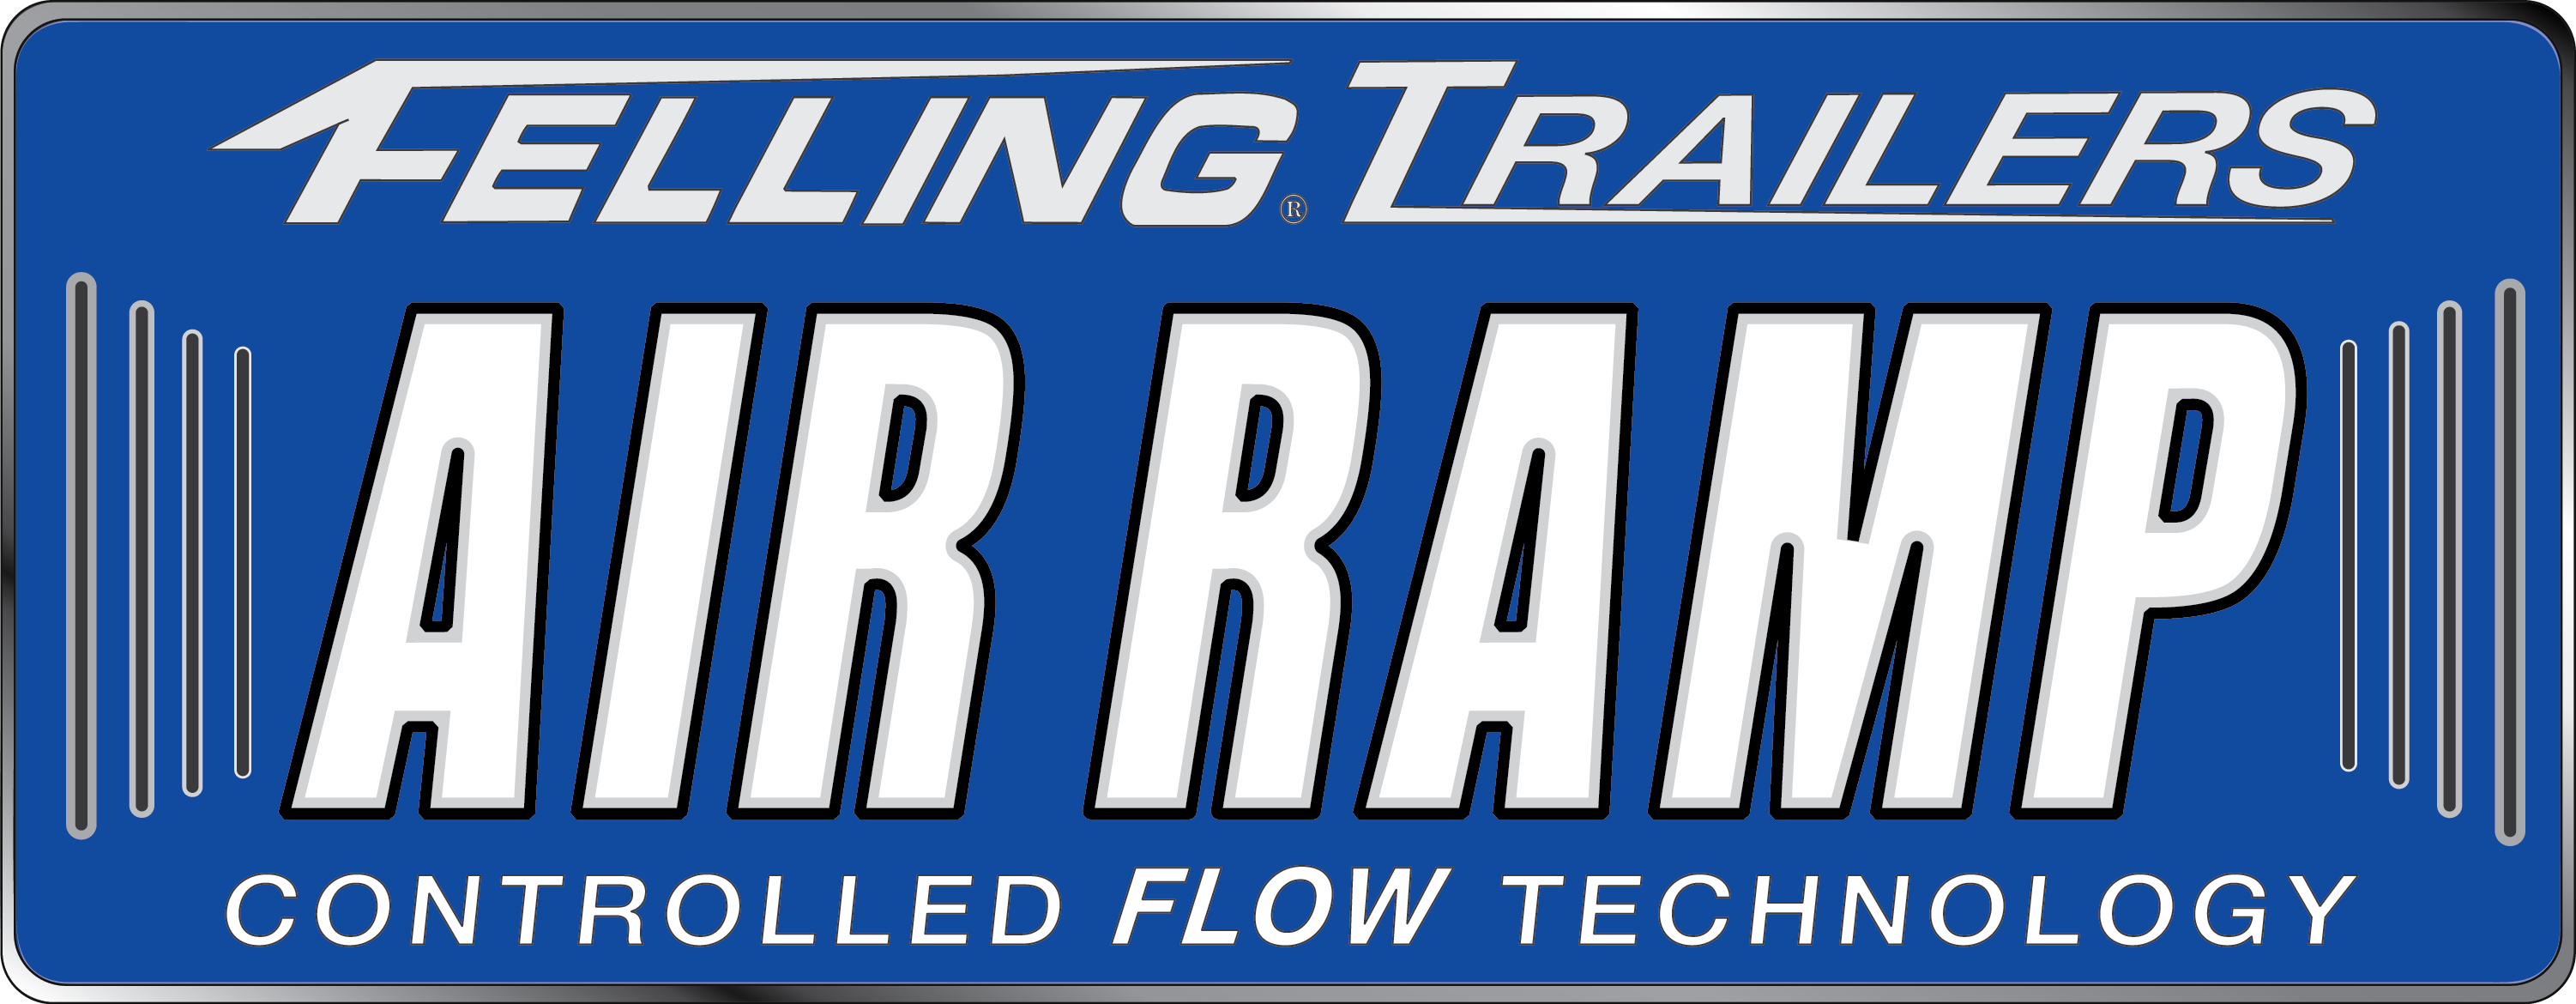 Felling Air Ramp Controlled Flow Technology logo